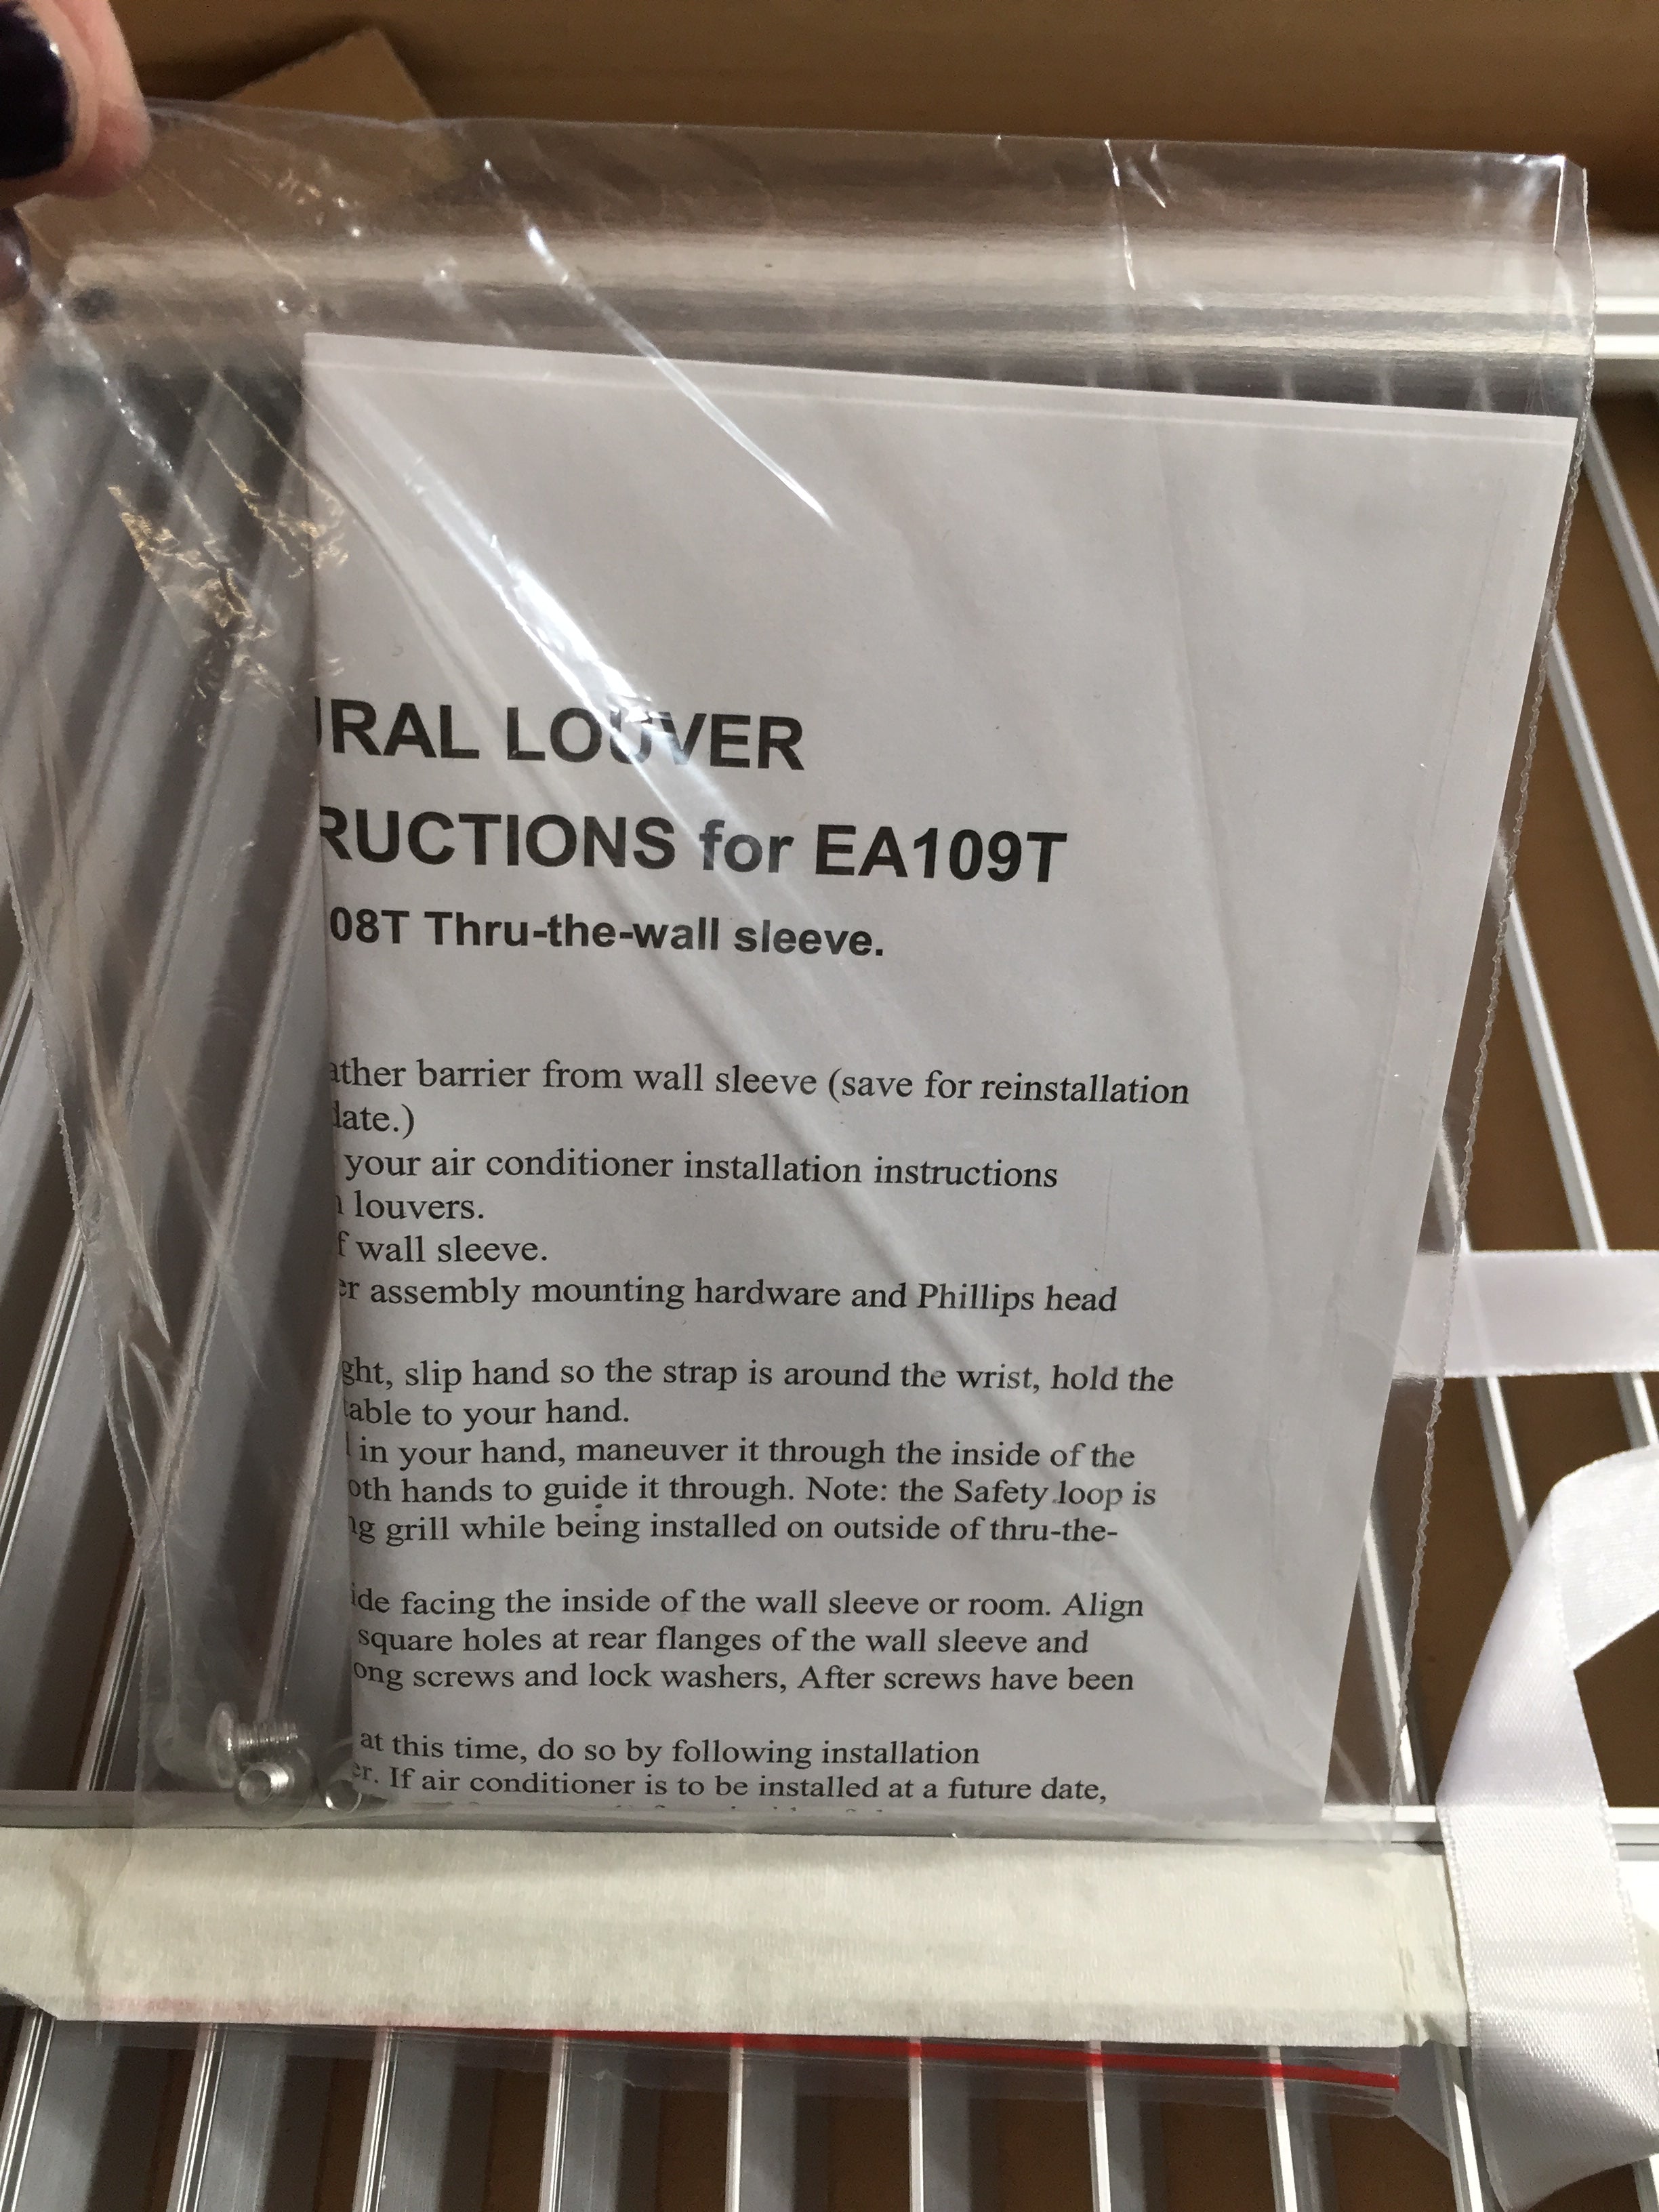 Protective Rear Grille for Through-the-Wall Air Conditioners (EA109T) *NIB* (8191032197358)